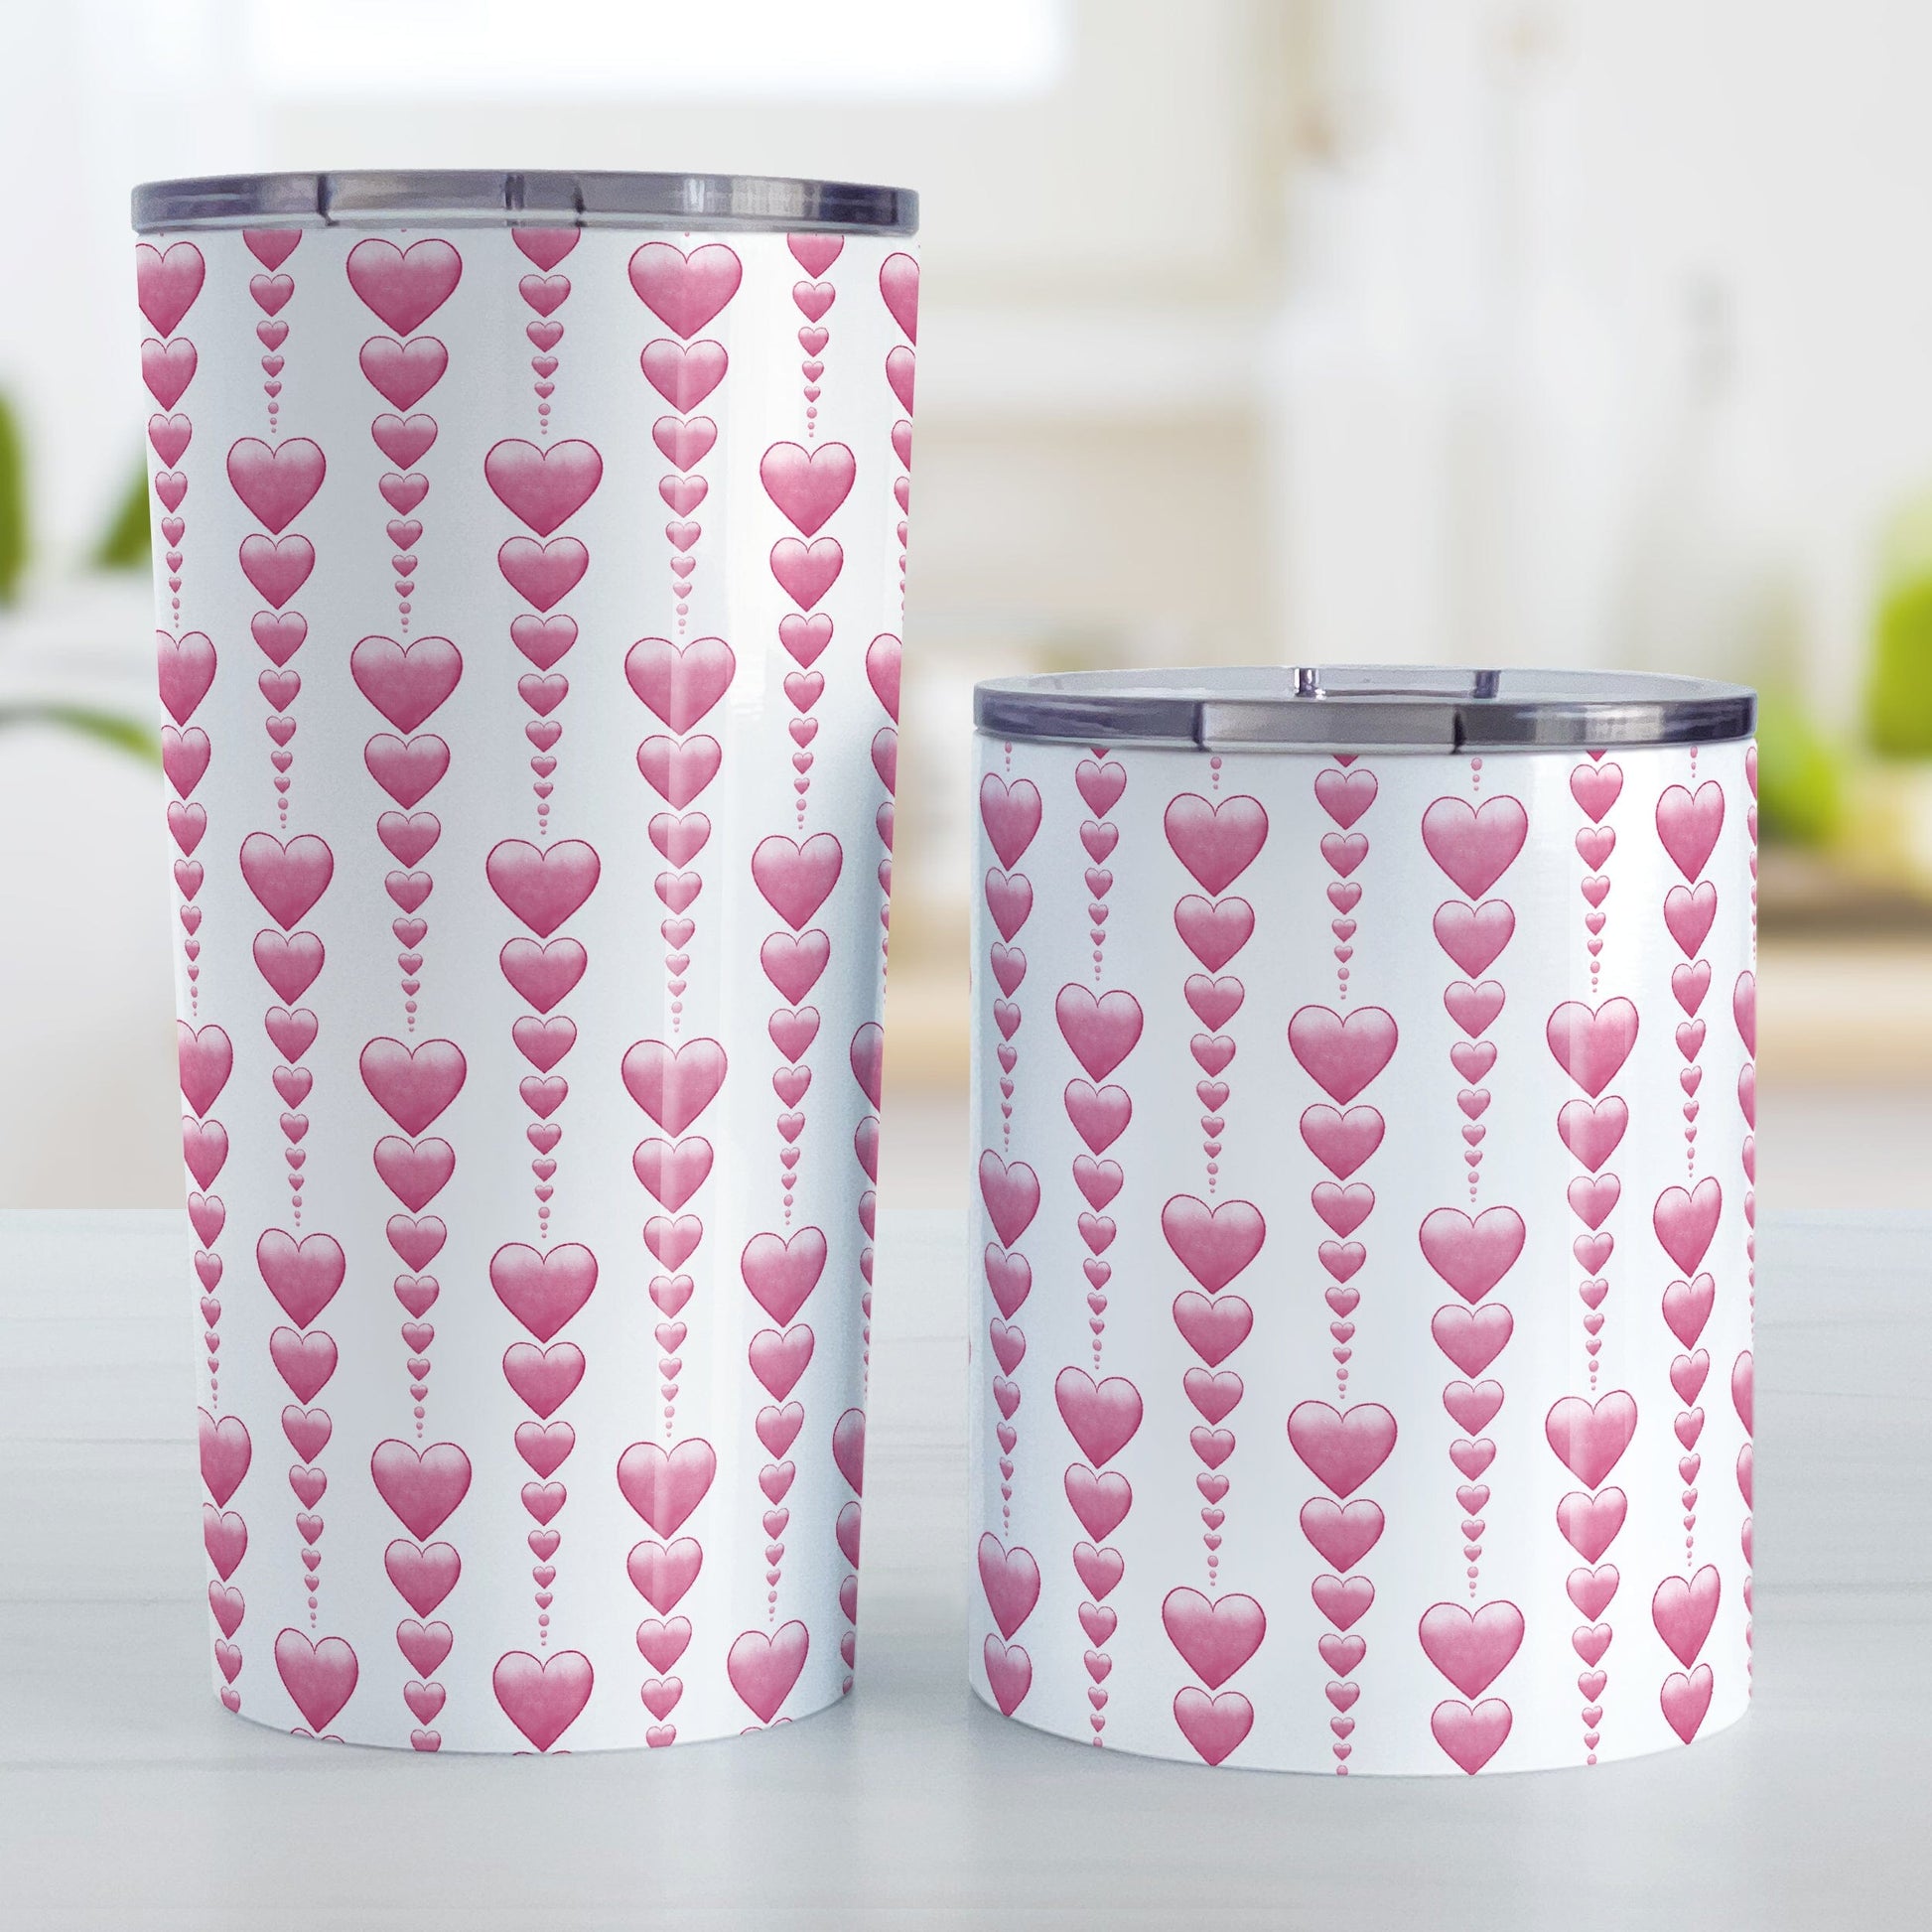 Heart Strings Tumbler Cup (20oz or 10oz) at Amy's Coffee Mugs. Stainless steel insulated tumbler cups designed with strings of pink hearts descending in size in a pattern that wraps around the cups. Photo shows both sized cups next to each other on a table.